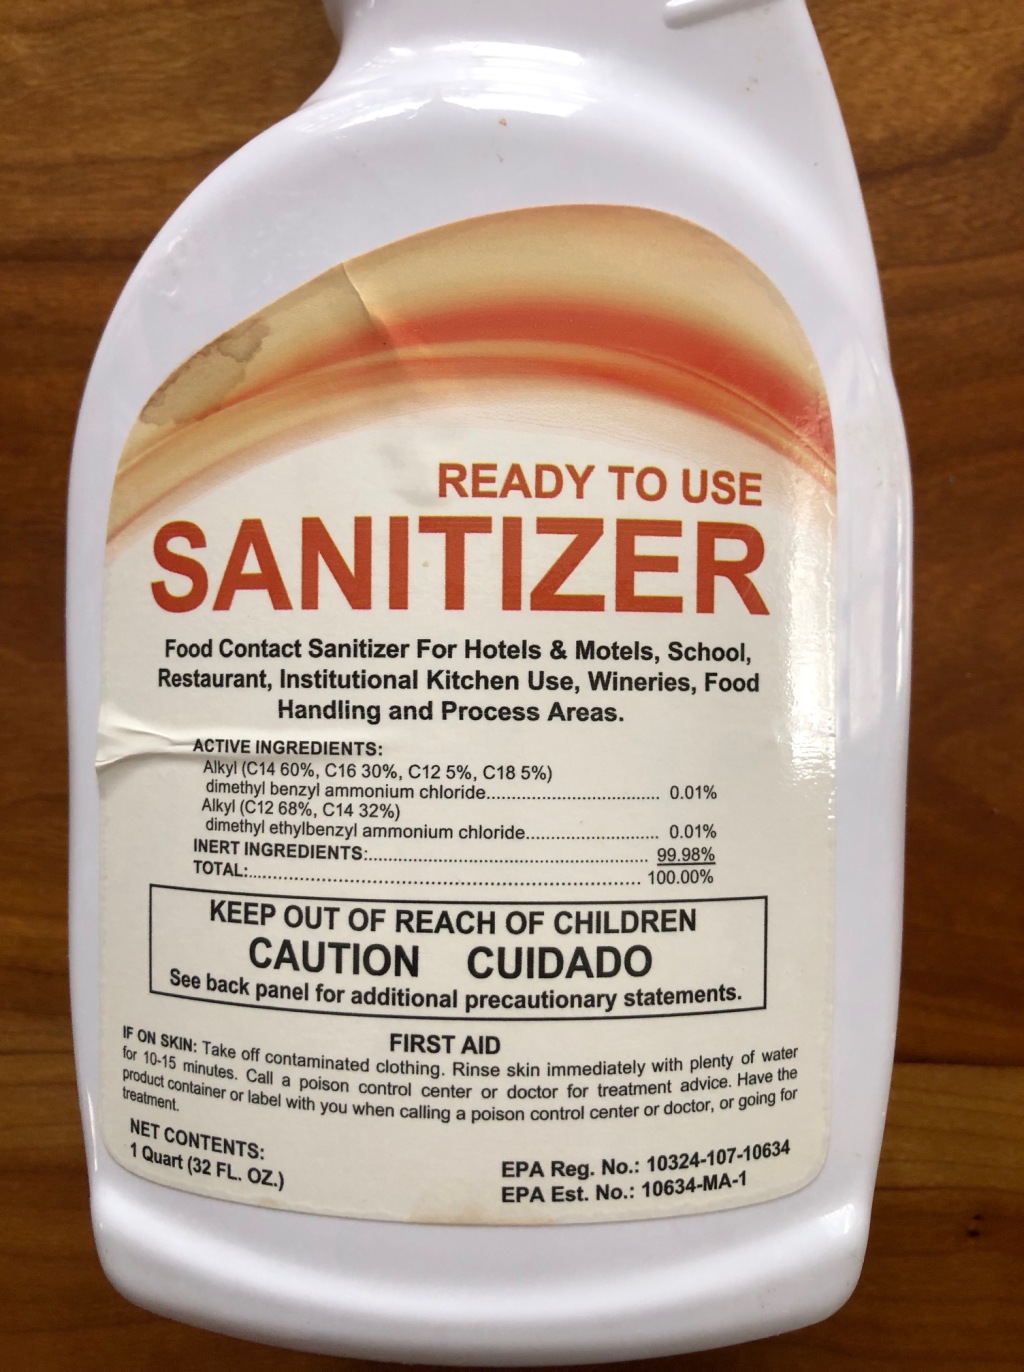 Food Safety – Surfaces and Equipment Sanitization